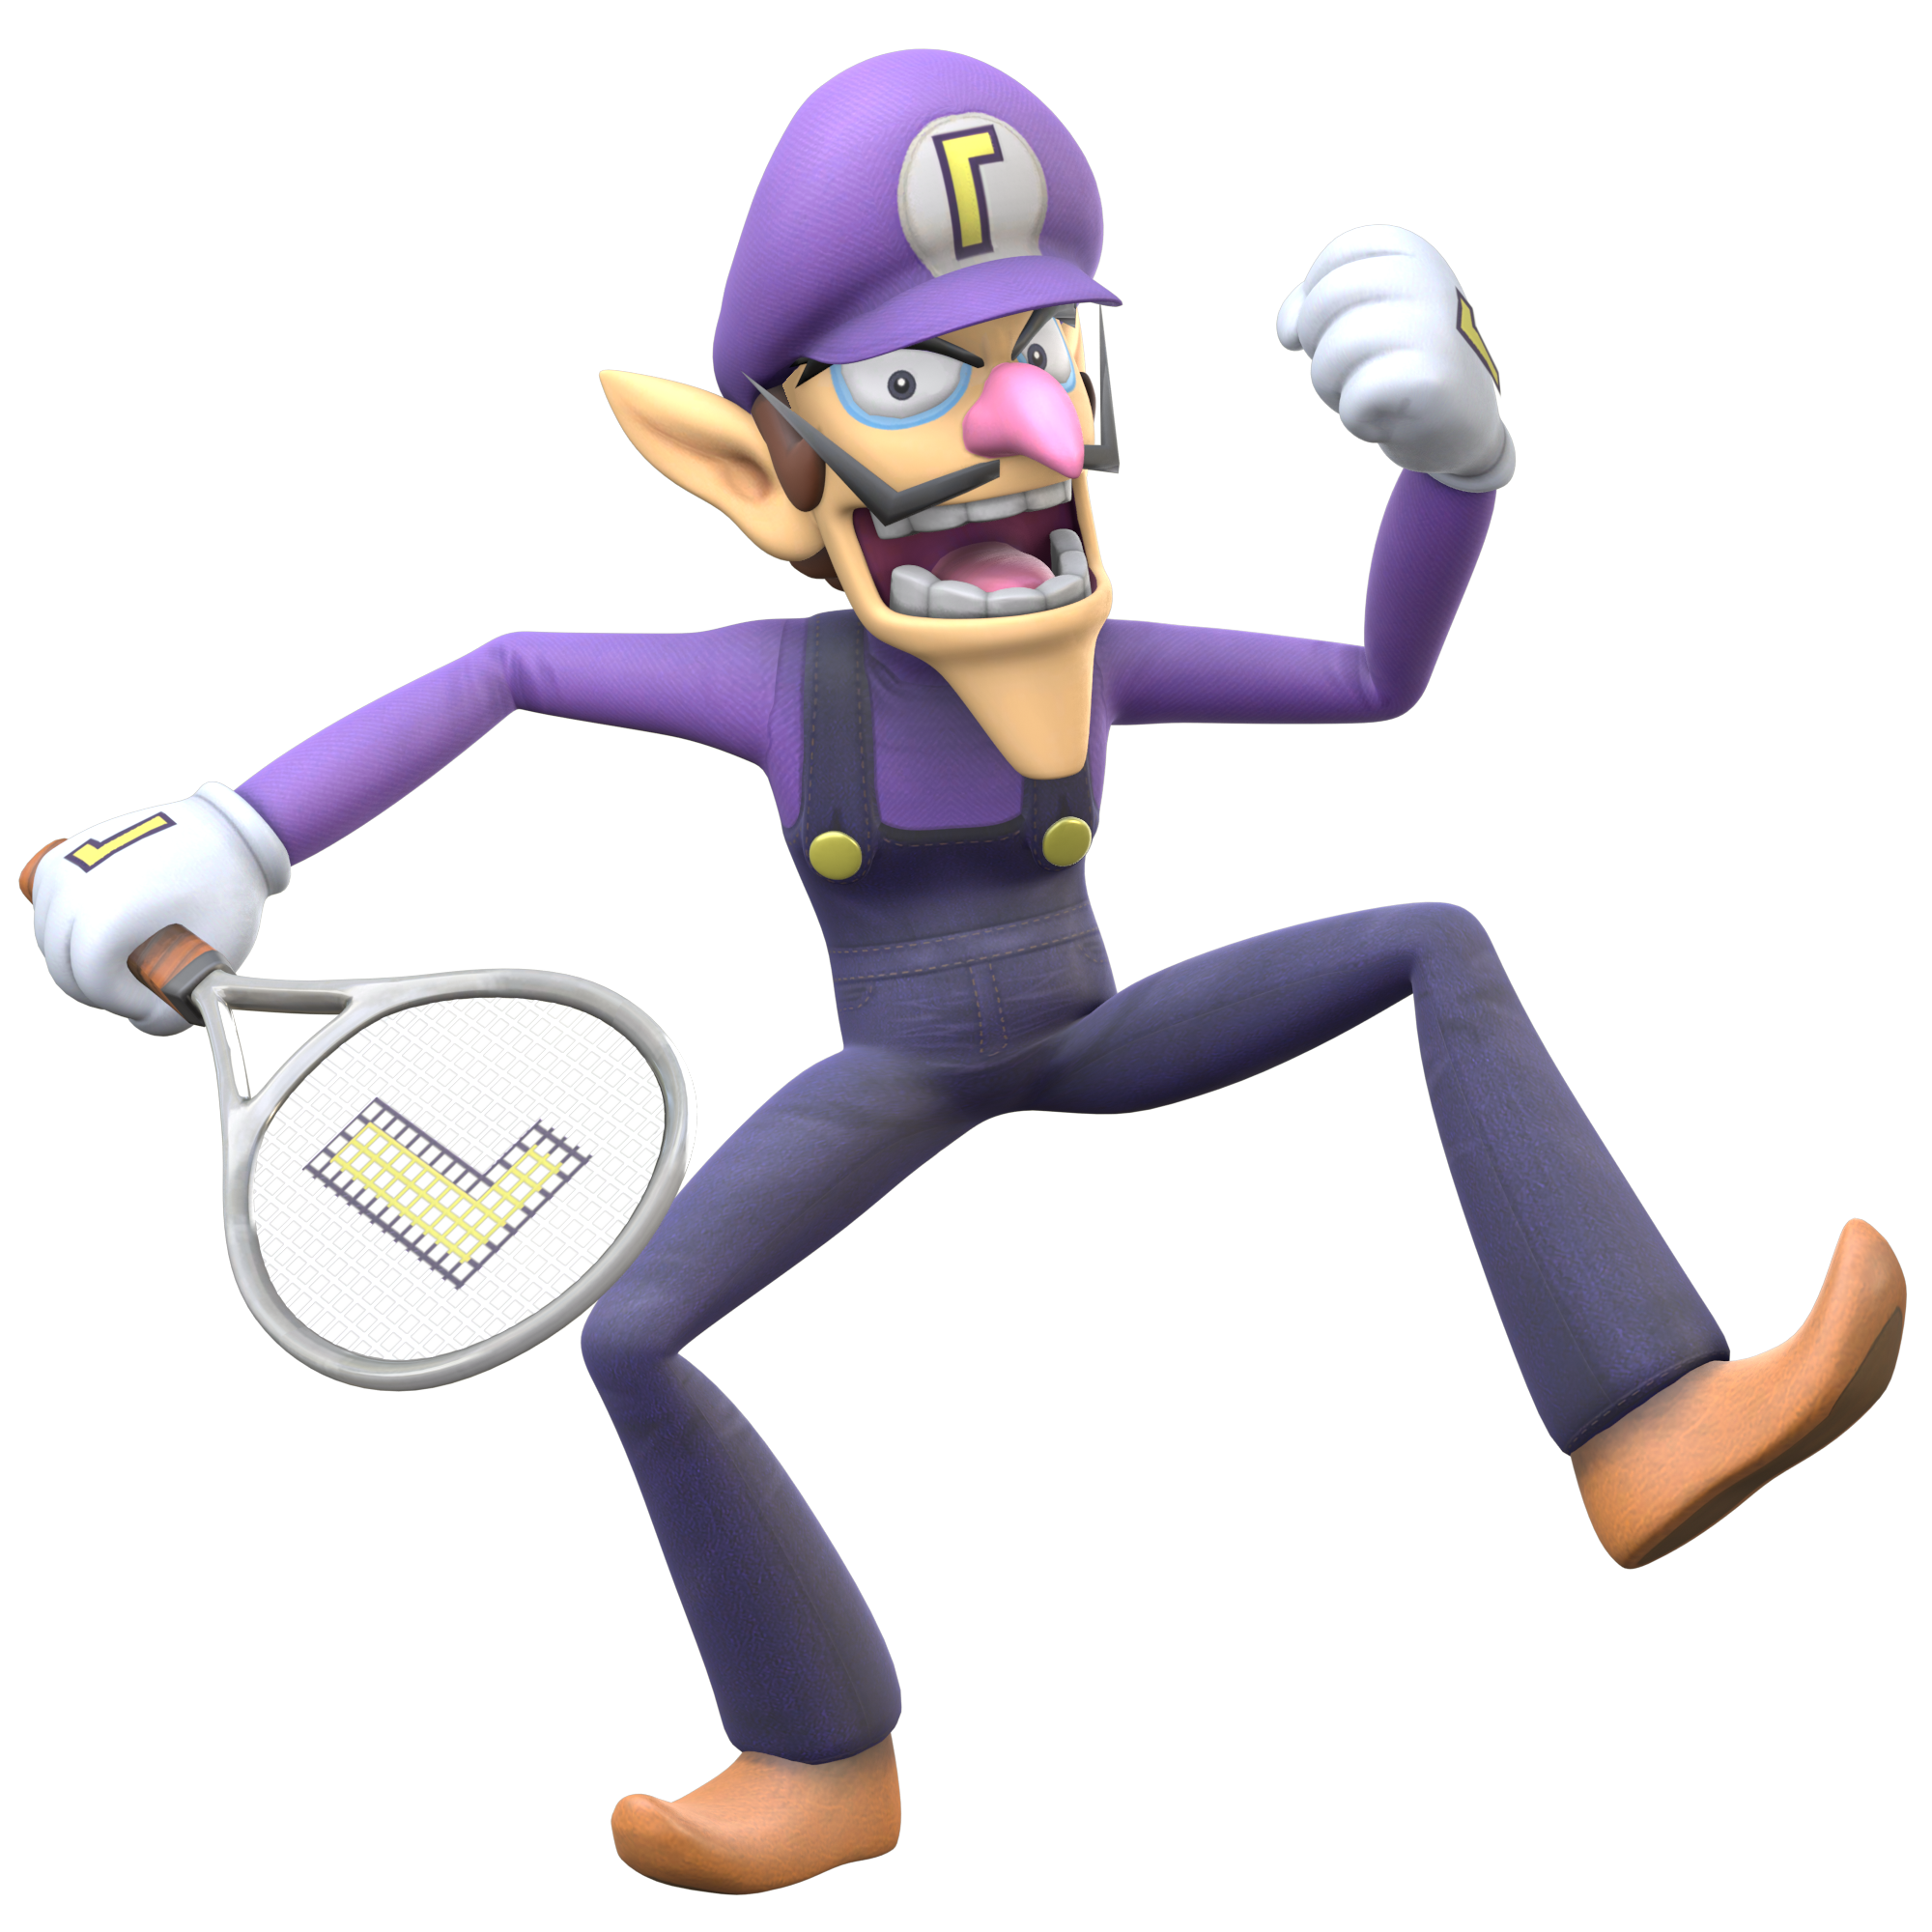 Waluigi, Master Chief and Smash Ultimate's biggest roster snubs - The  Washington Post